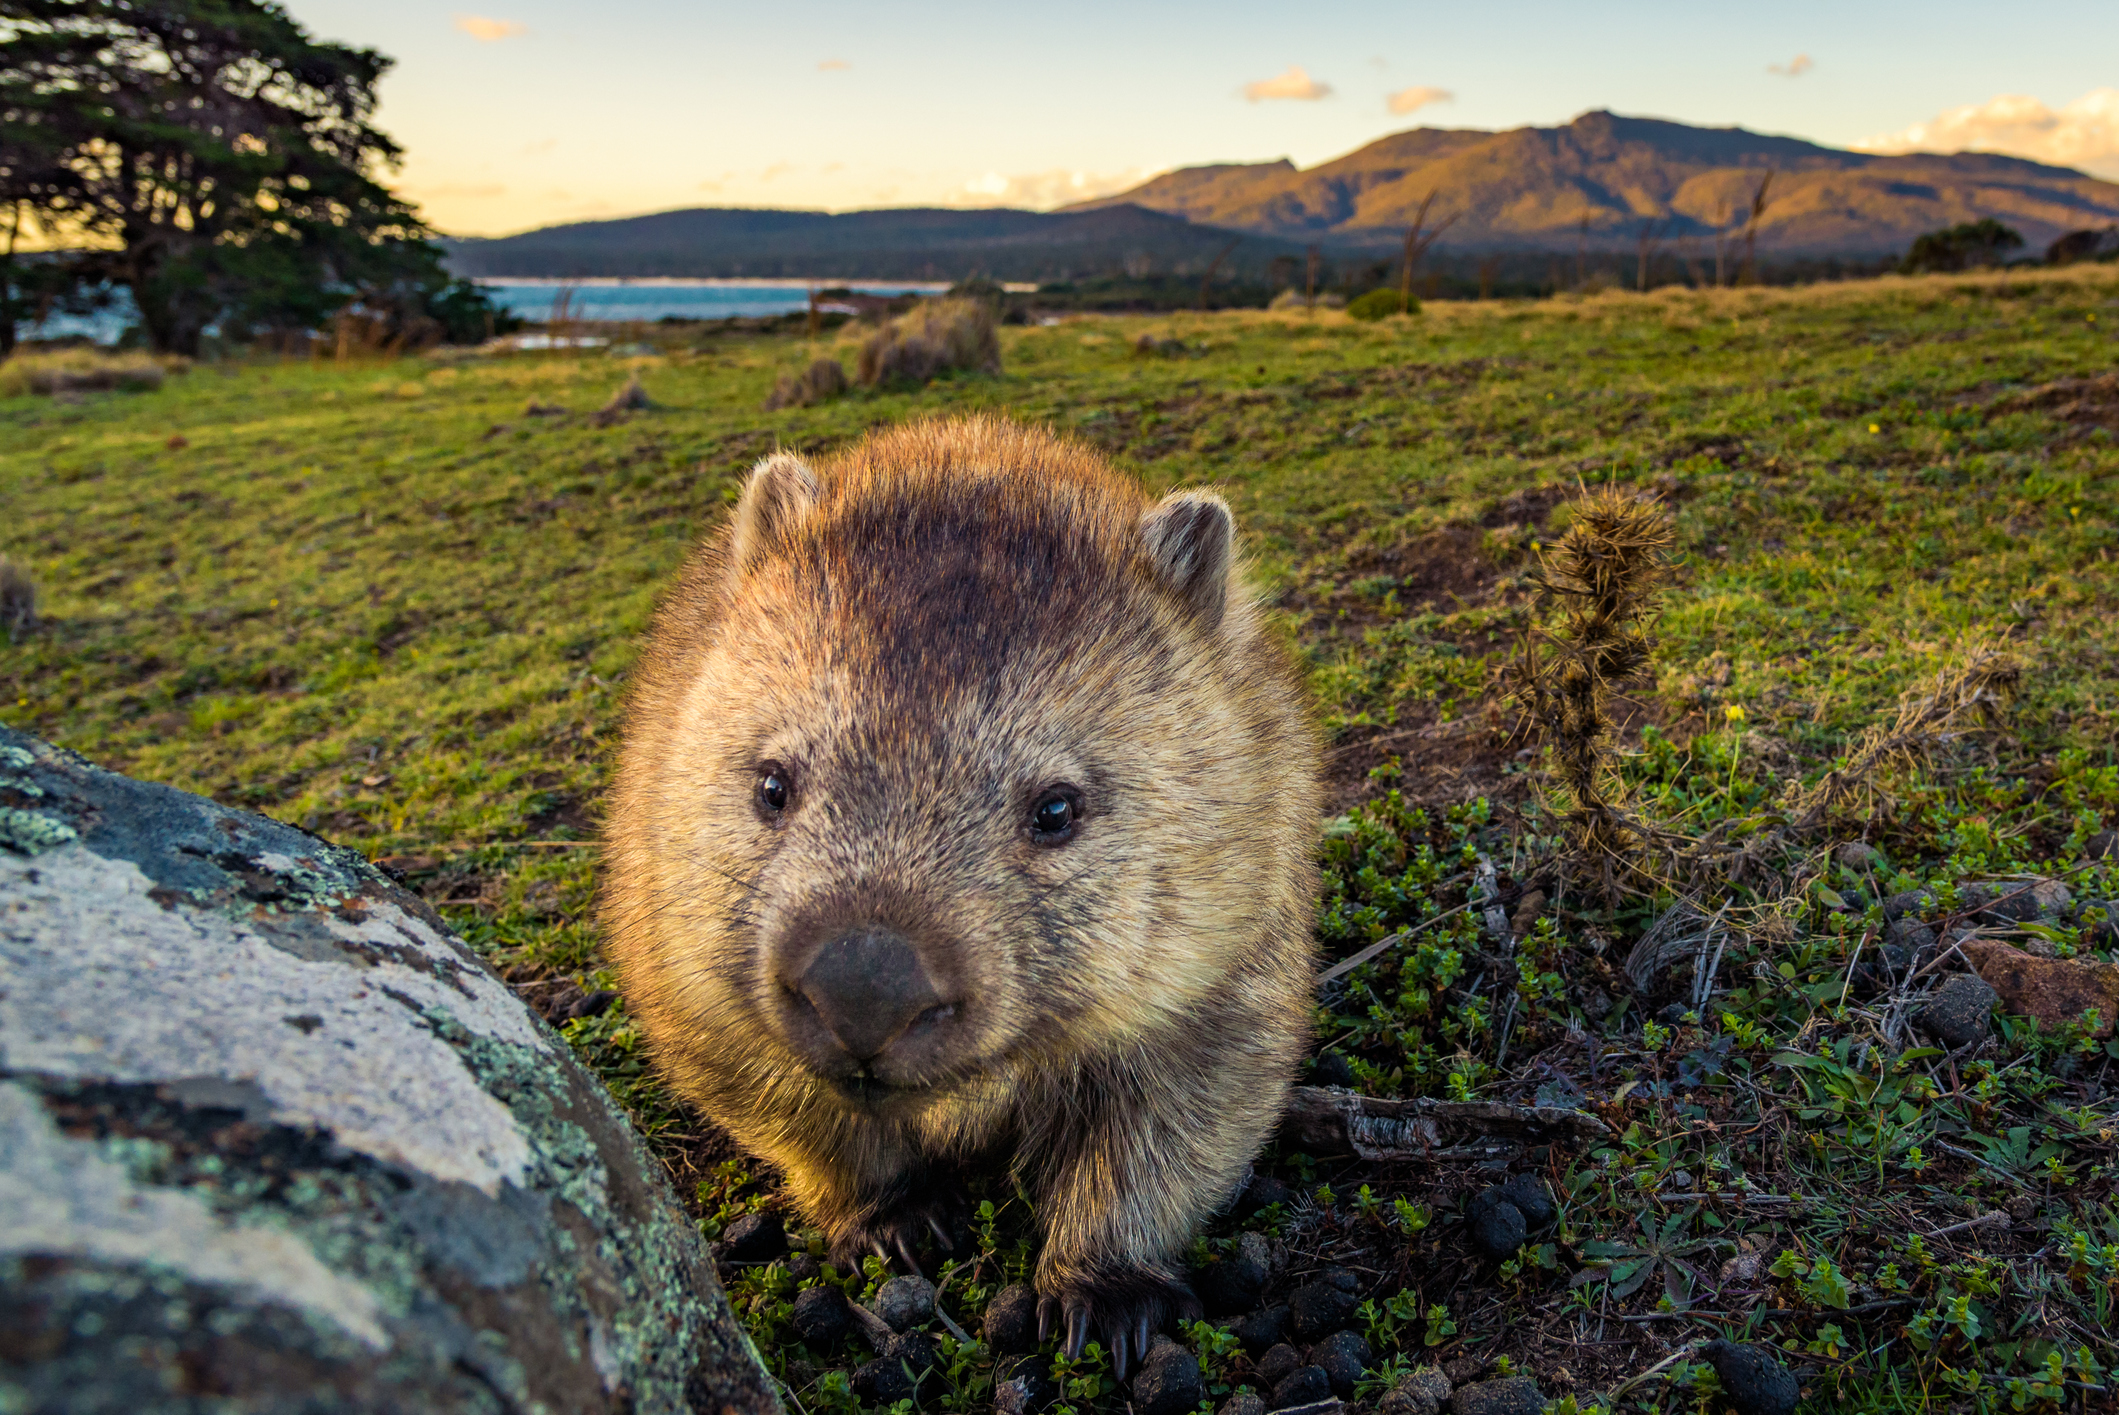 I Shit You Not, Aussie Scientists Just Won A Nobel Prize For Research On Cubed Wombat Poo